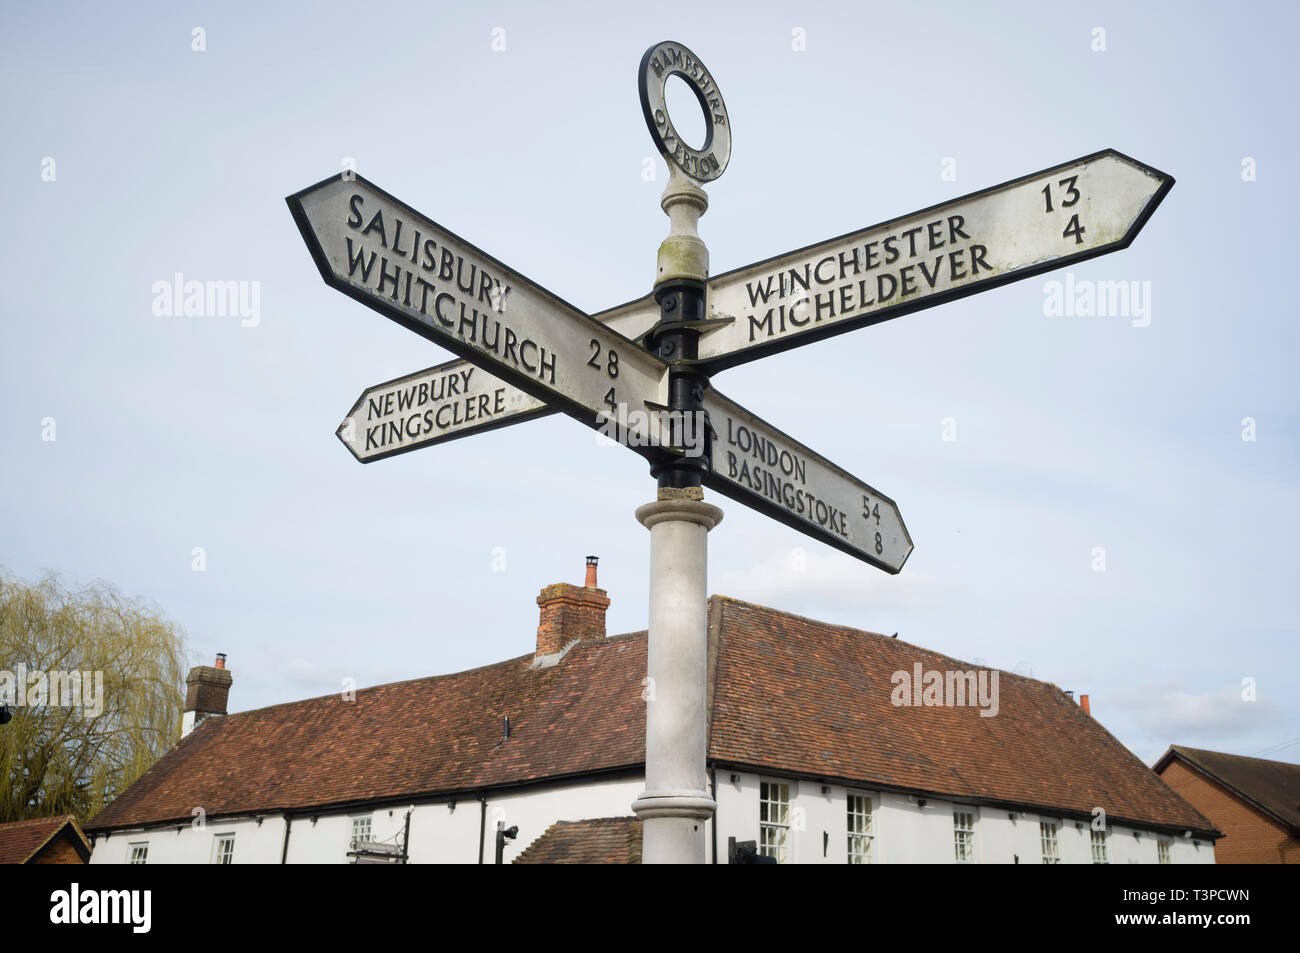 An old cast iron direction sign in Overton, Hampshire pointing to Salisbury, Whitchurch, Winchester, Micheldever, Newbury & Kingsclere Stock Photo